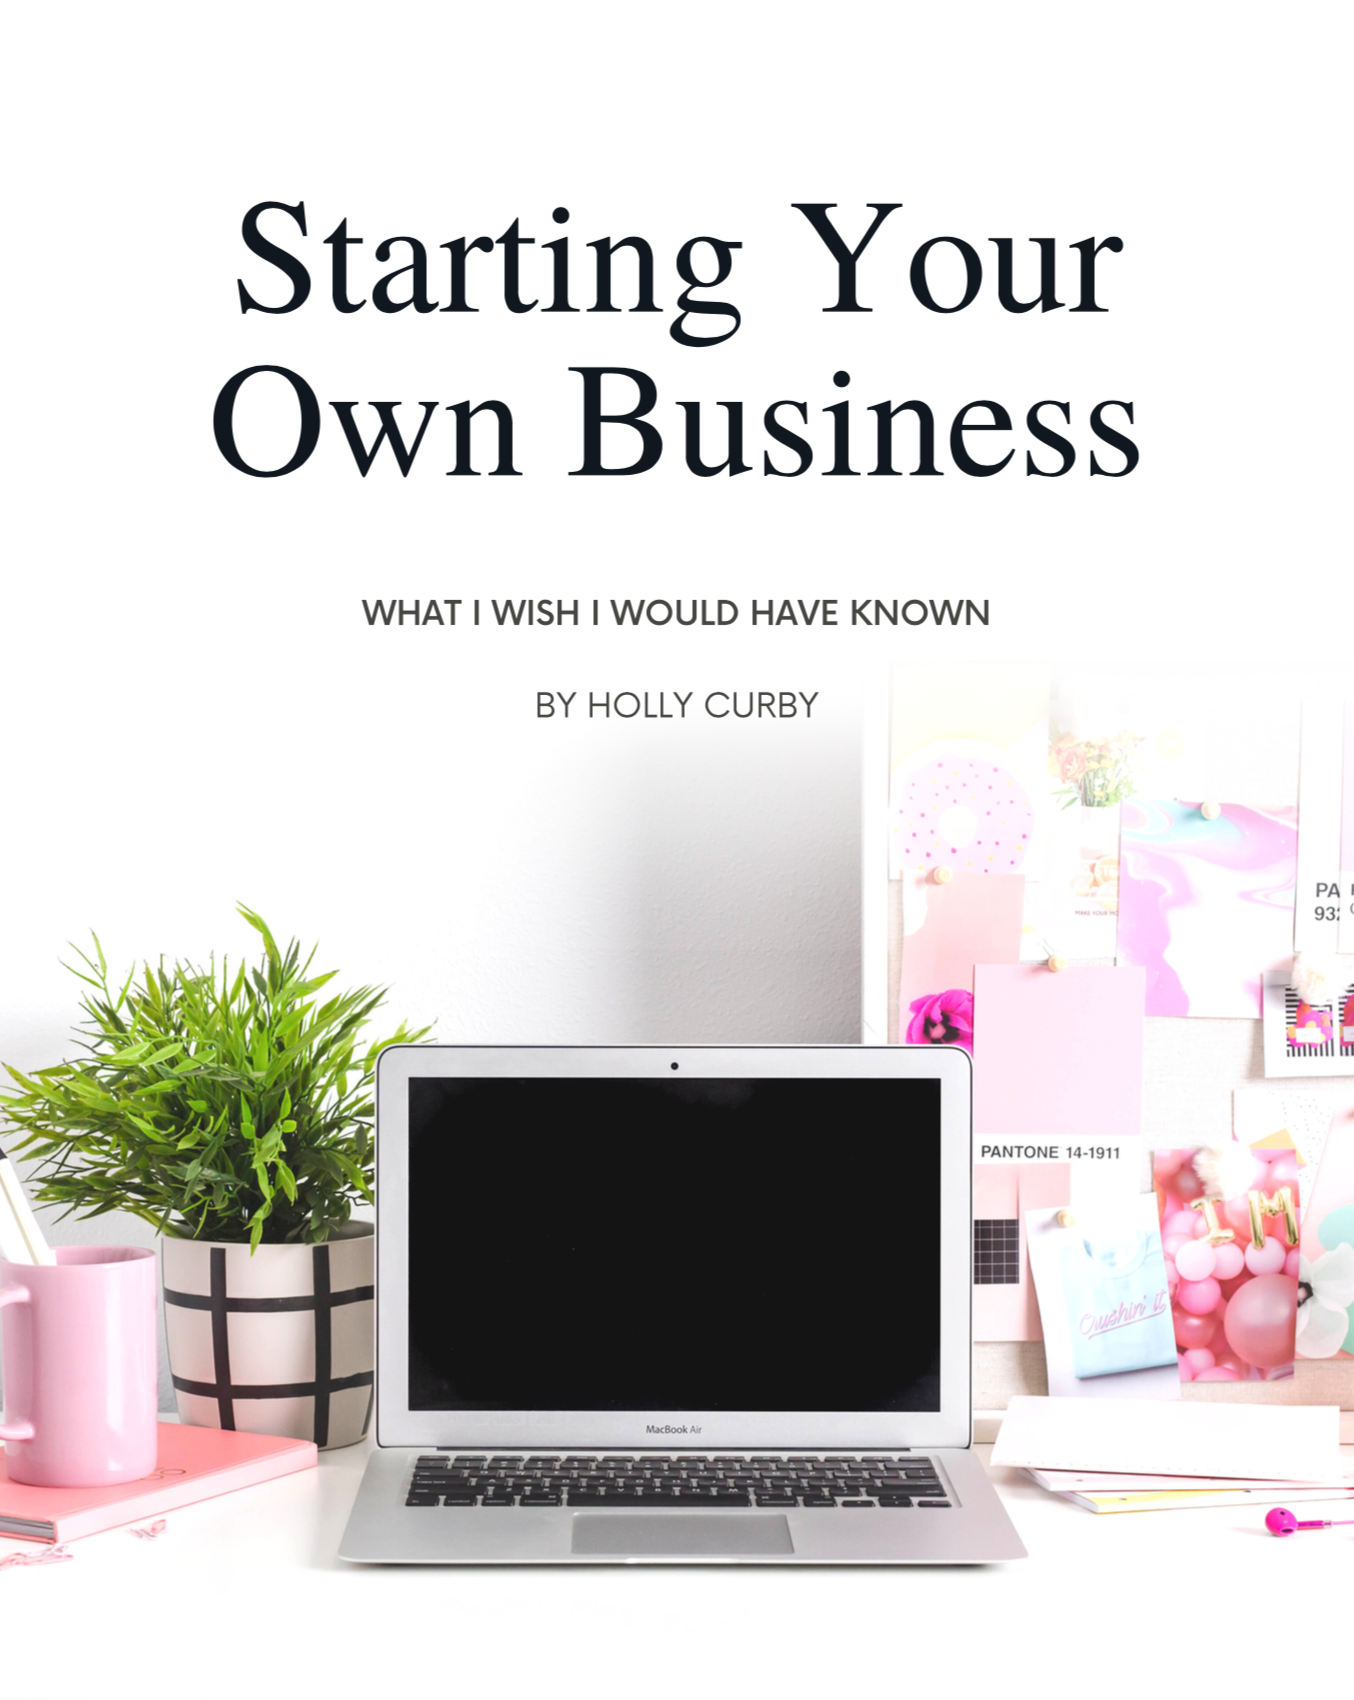 Starting Your Own Business Booklet